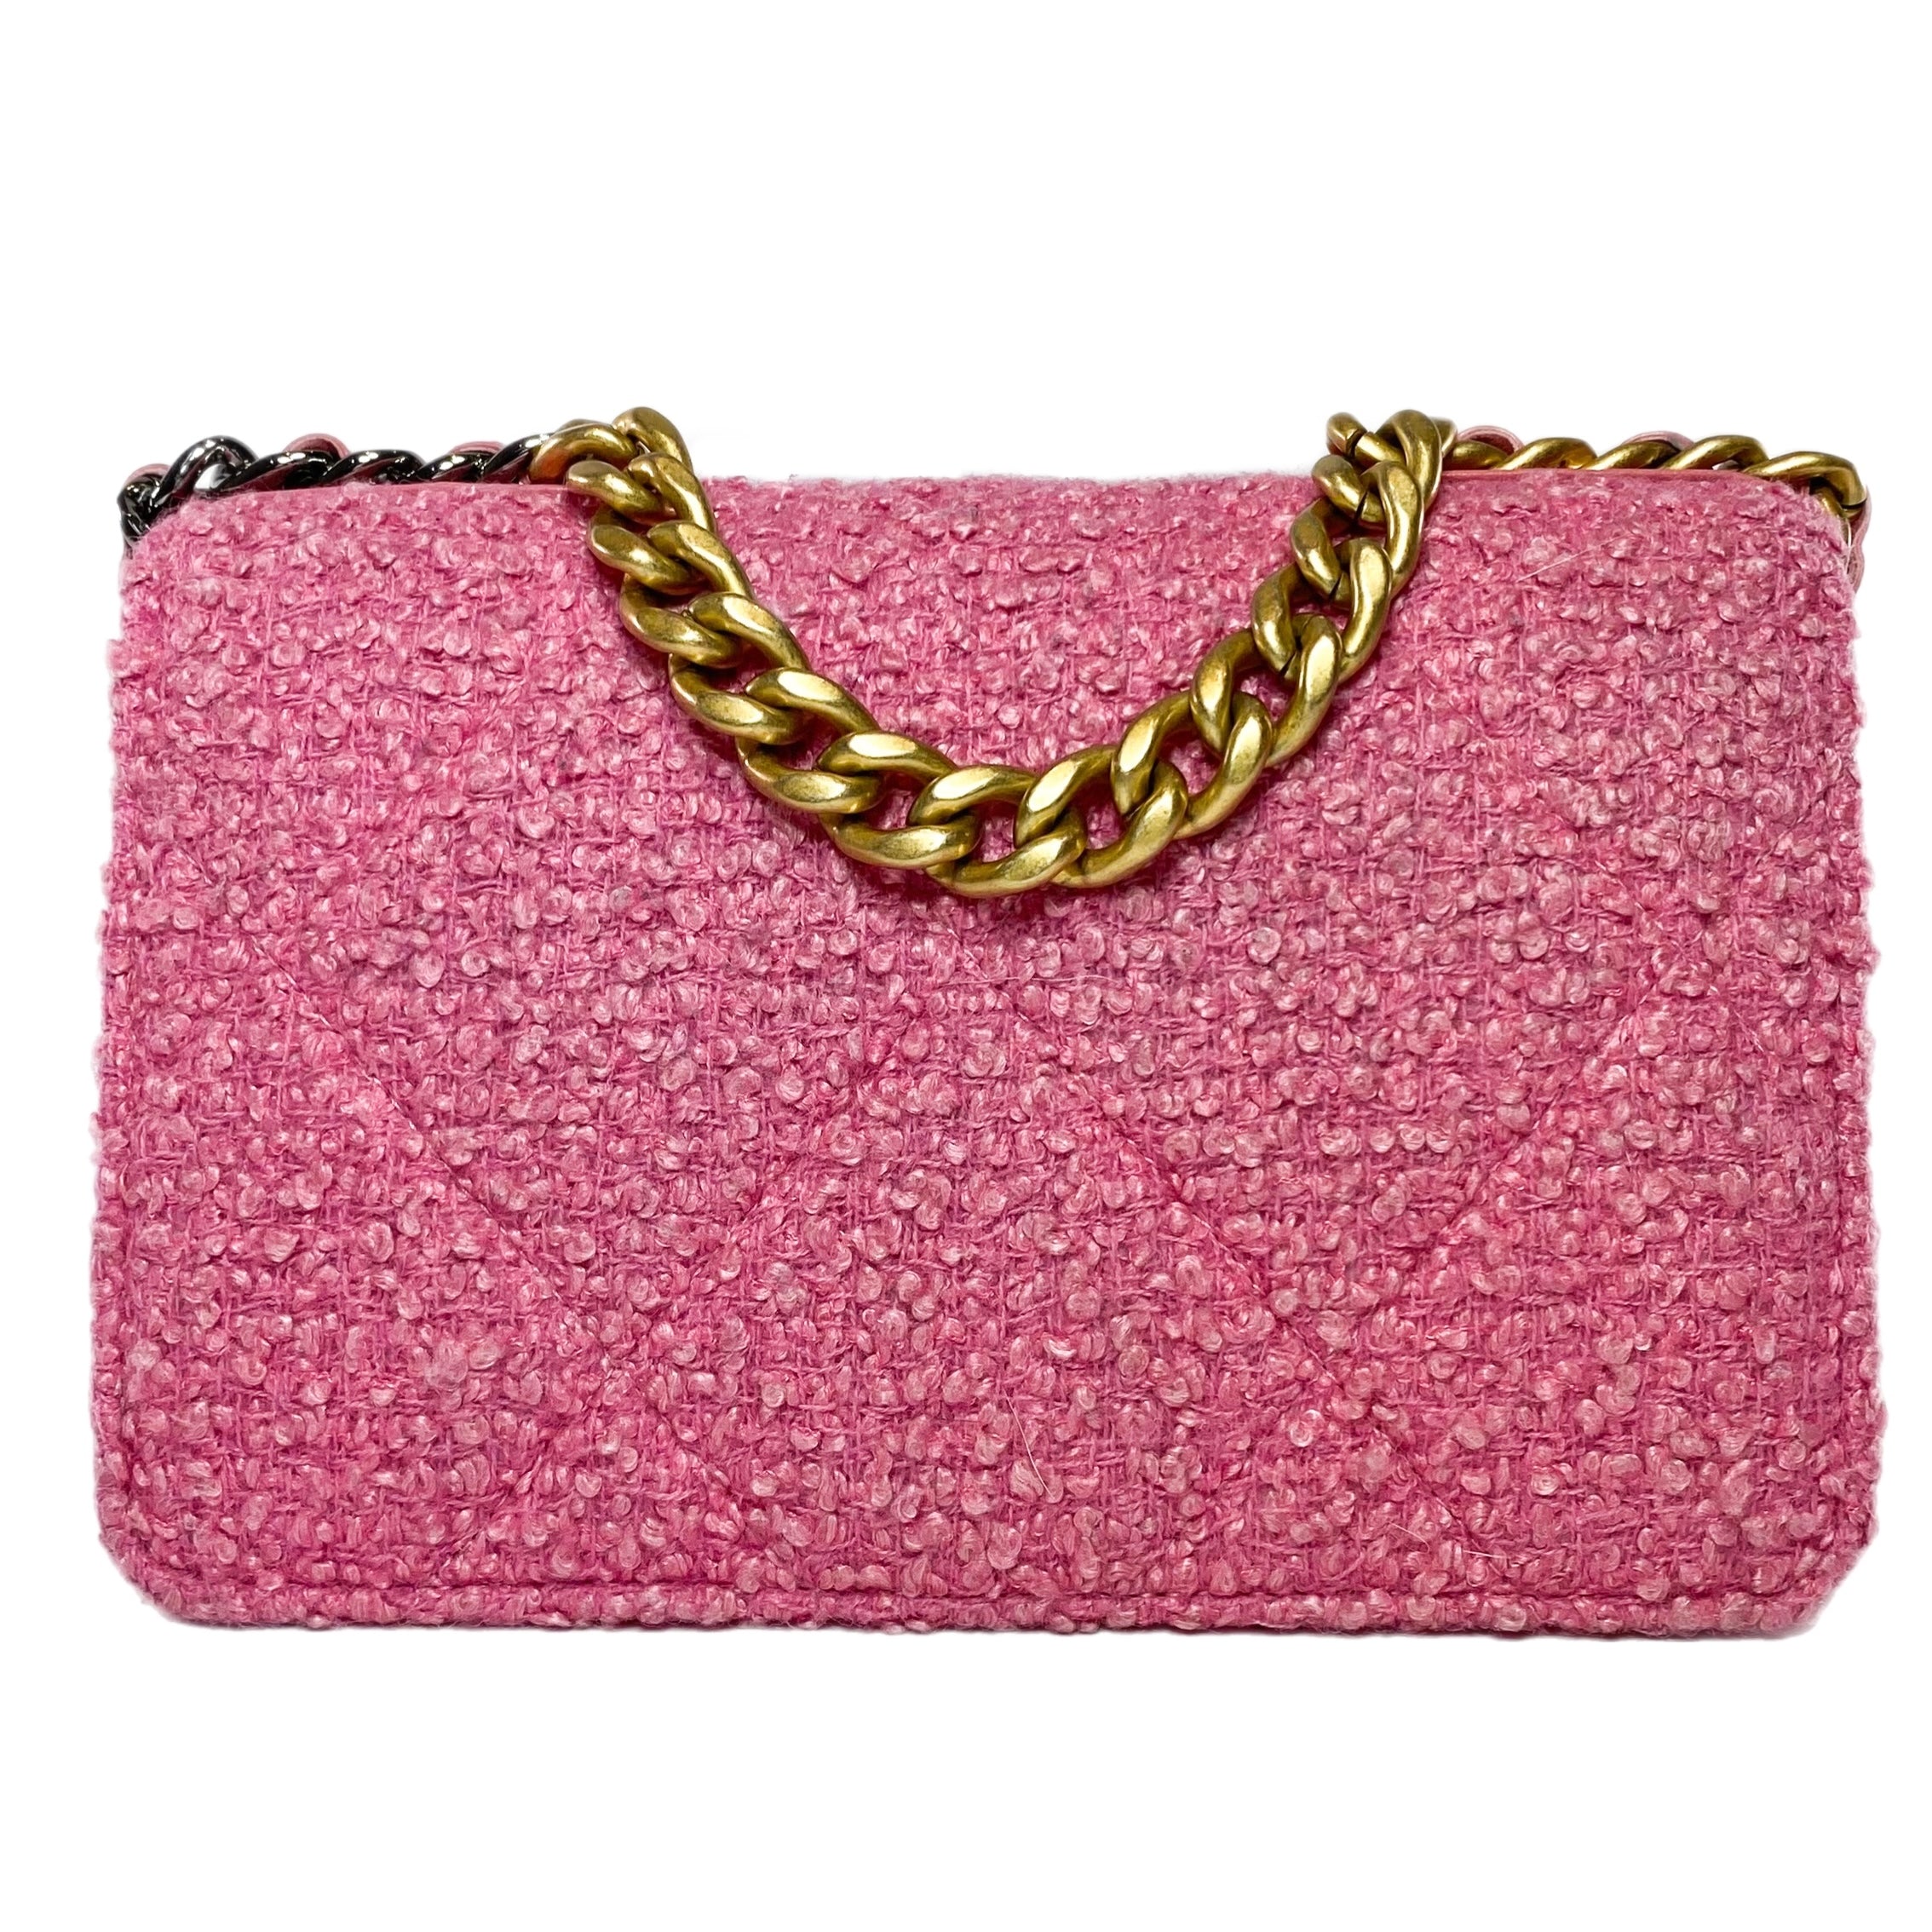 Chanel Pink Tweed Wallet on Chain